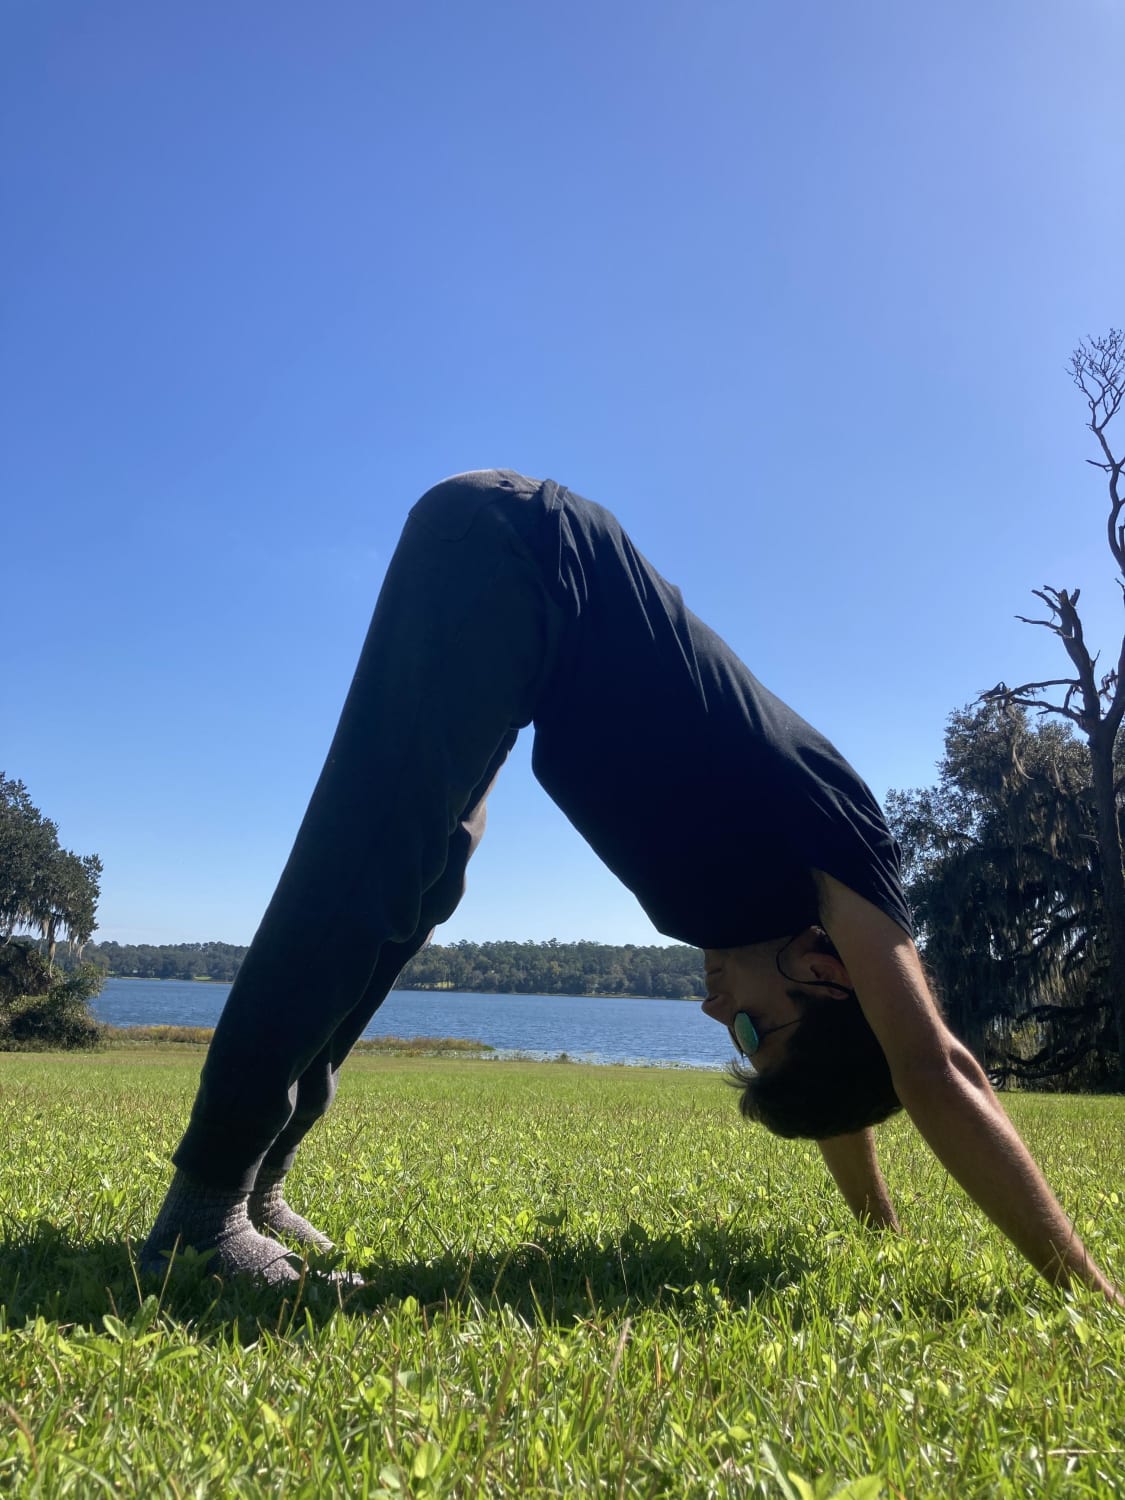 [COMP] Kundalini triangle - looks similar to down dog but the stance is narrower and the hands are further apart. Five minutes is a good hold time.